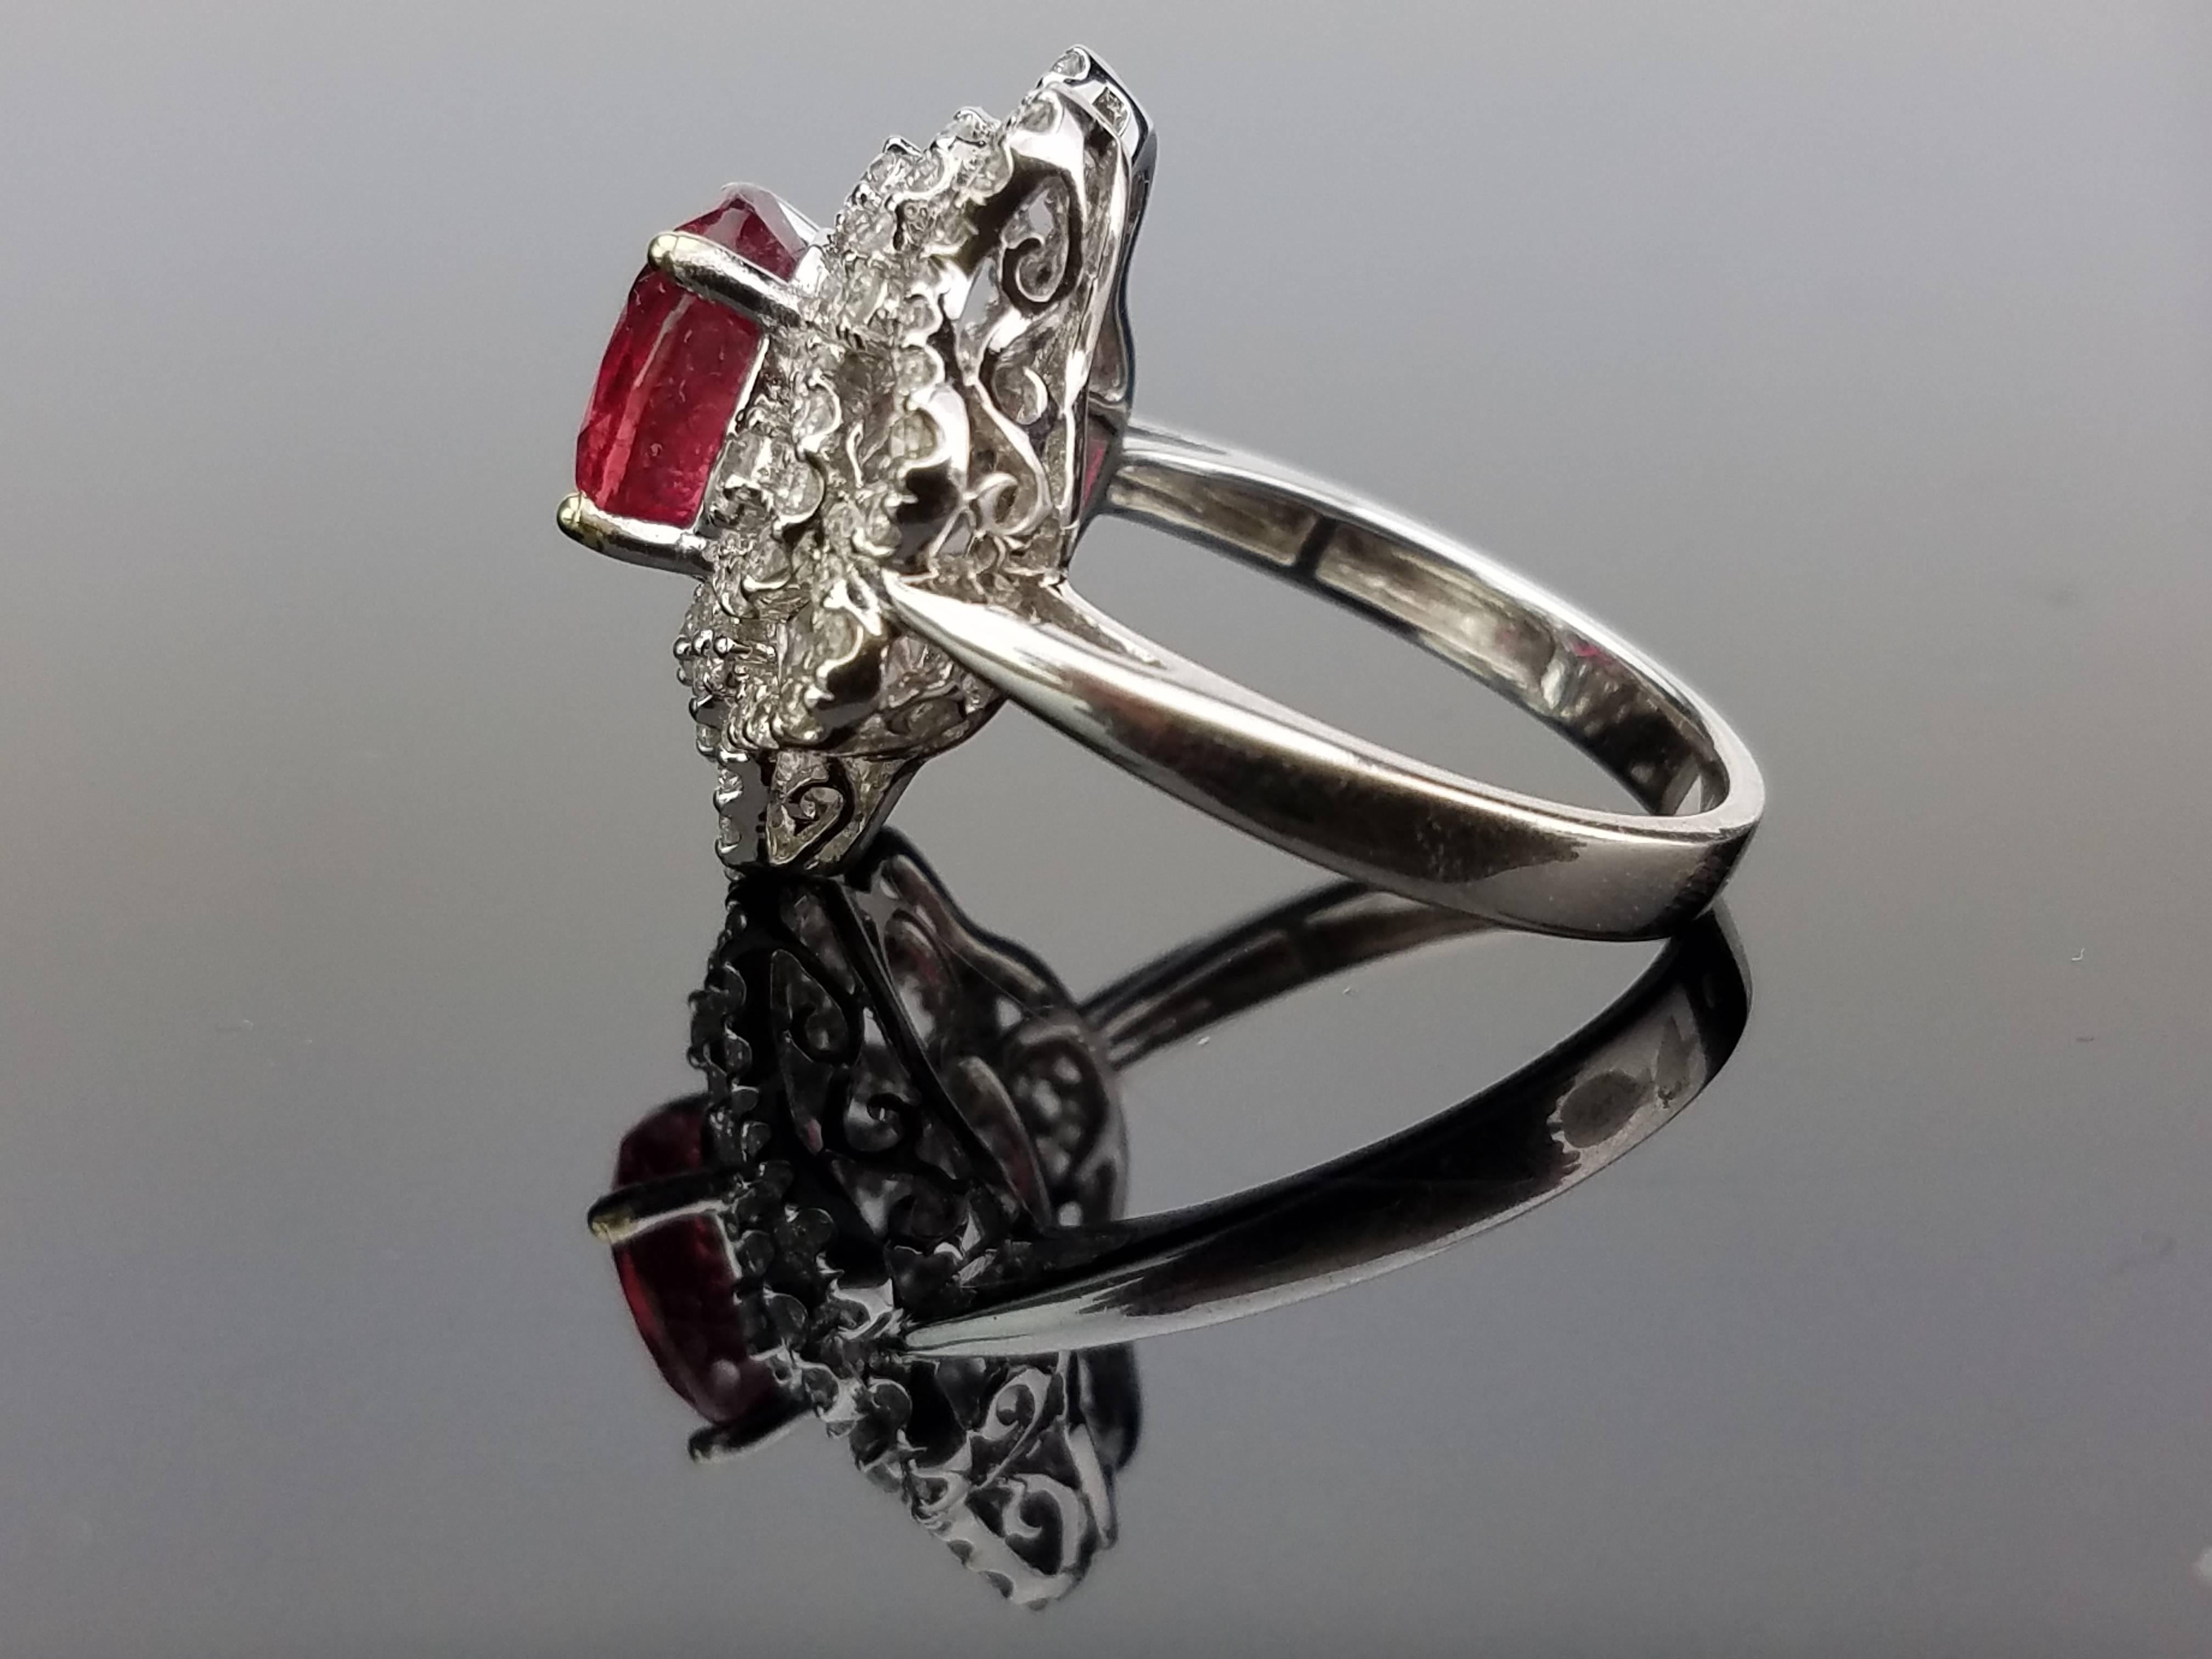 Stone Details:  
Stone: Mozambique Ruby
Cut: Oval
Carat Weight: 2.2 carat

Diamond Details:
Cut: Brilliant (round) 
Total Carat Weight: 0.62 carat
Quality: VS/SI , H/I 

18K Gold: 5.92 grams  

We can also sell the stone/mounting separately. 
Can